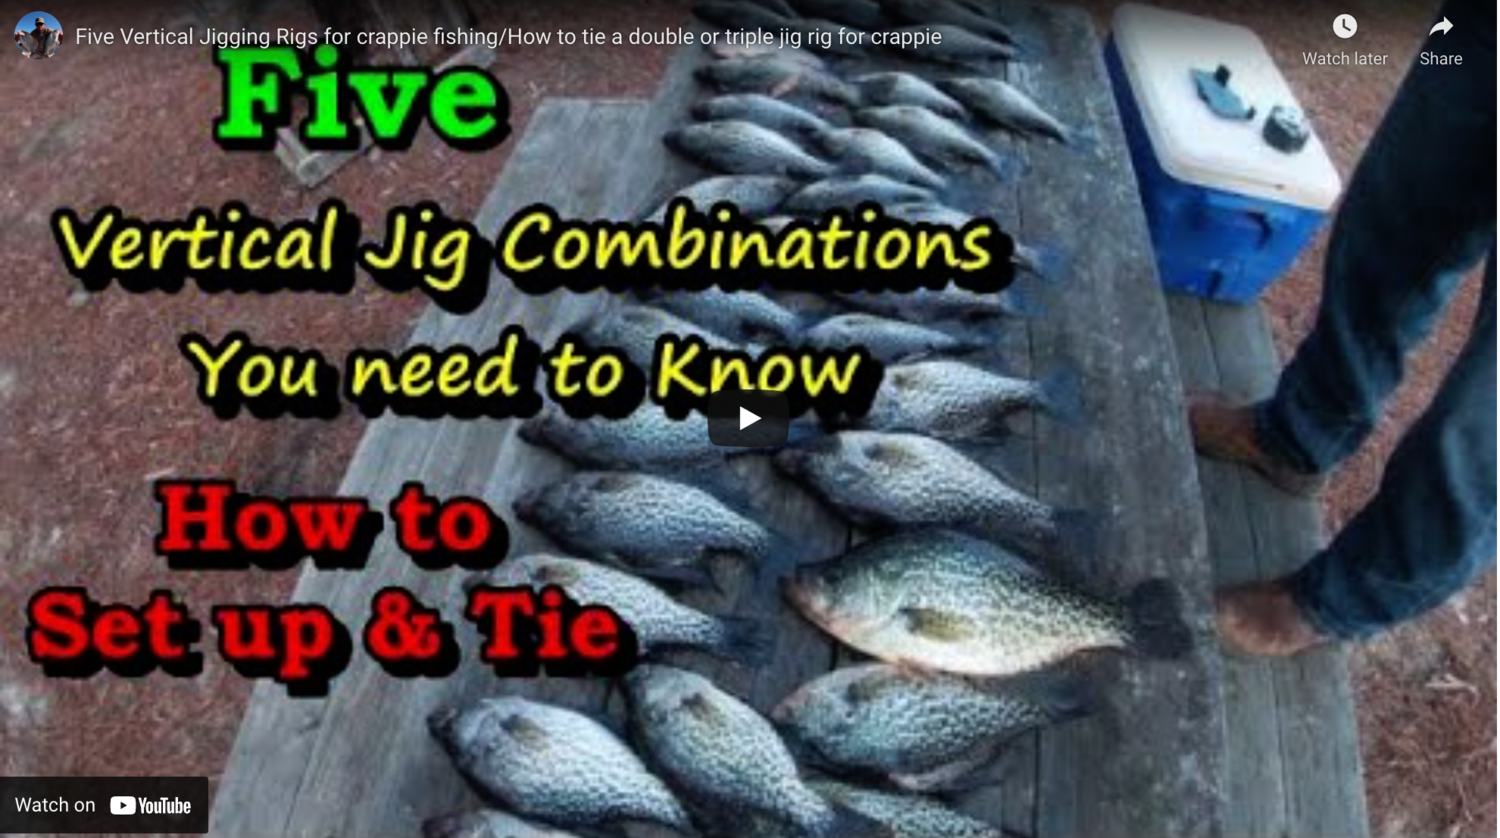 Five Vertical Jigging Rigs for crappie fishing/How to tie a double